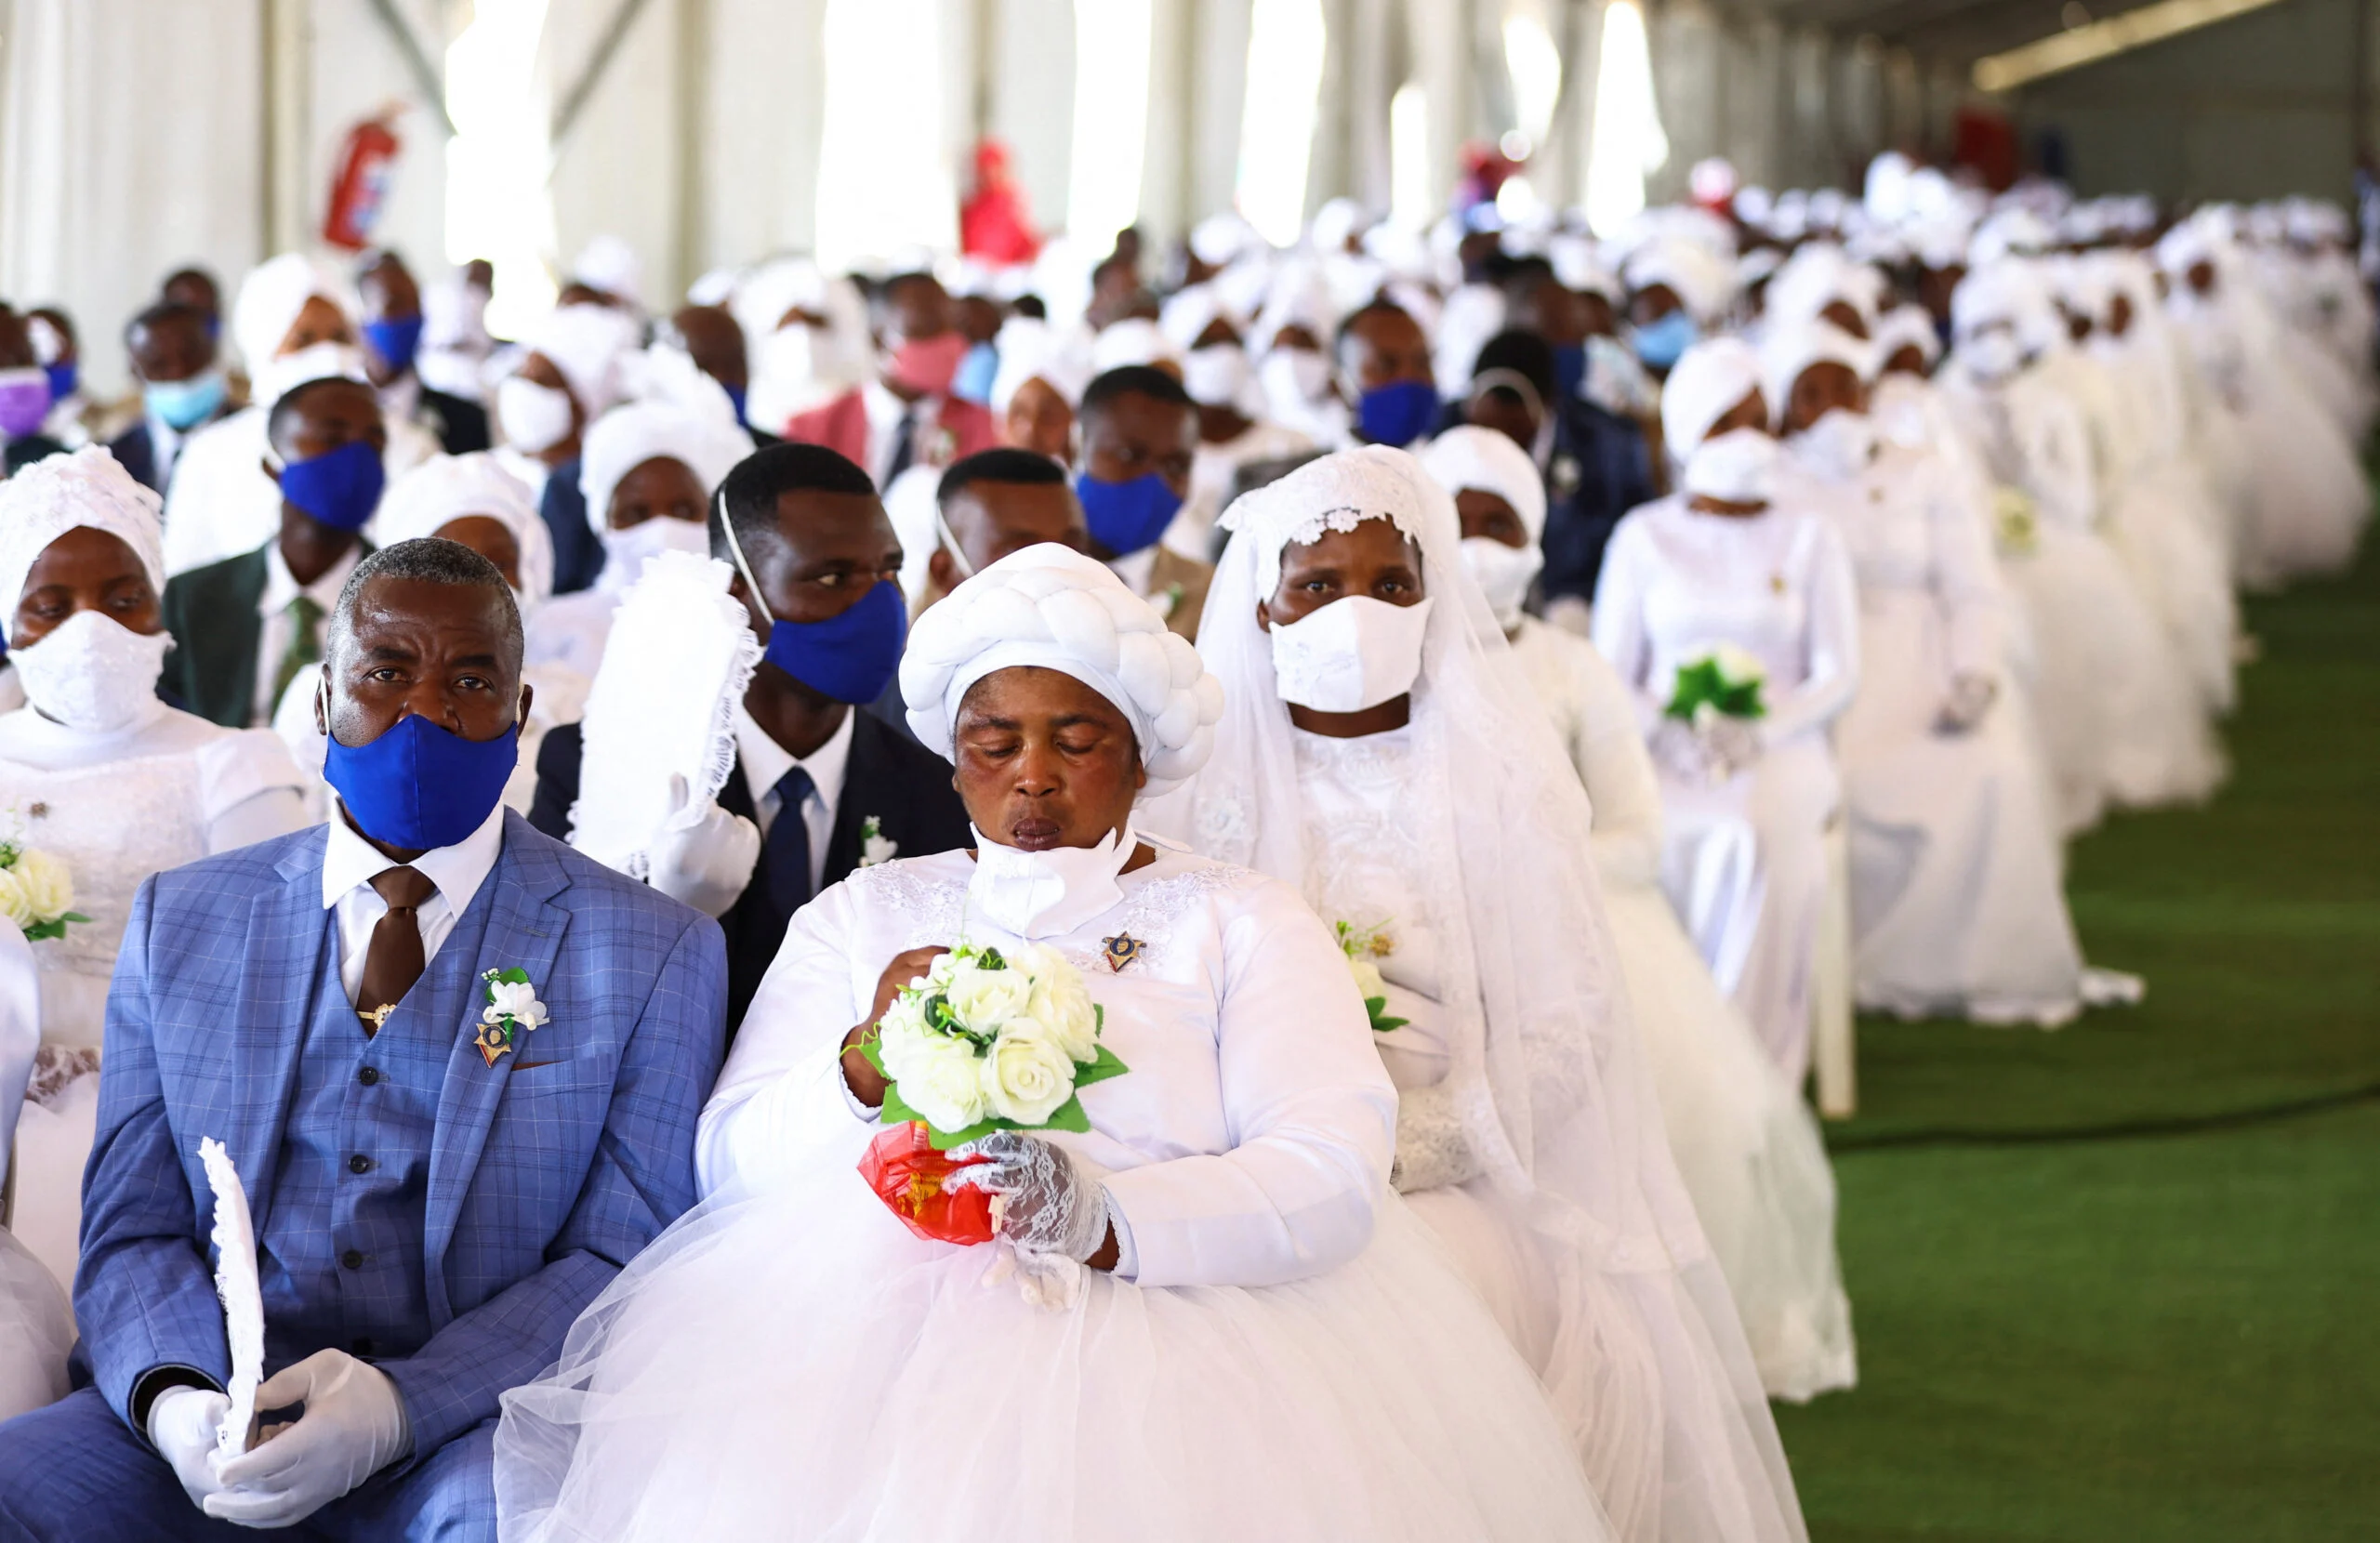 South Africa: Over 800 couples tie the knot on Easter Sunday